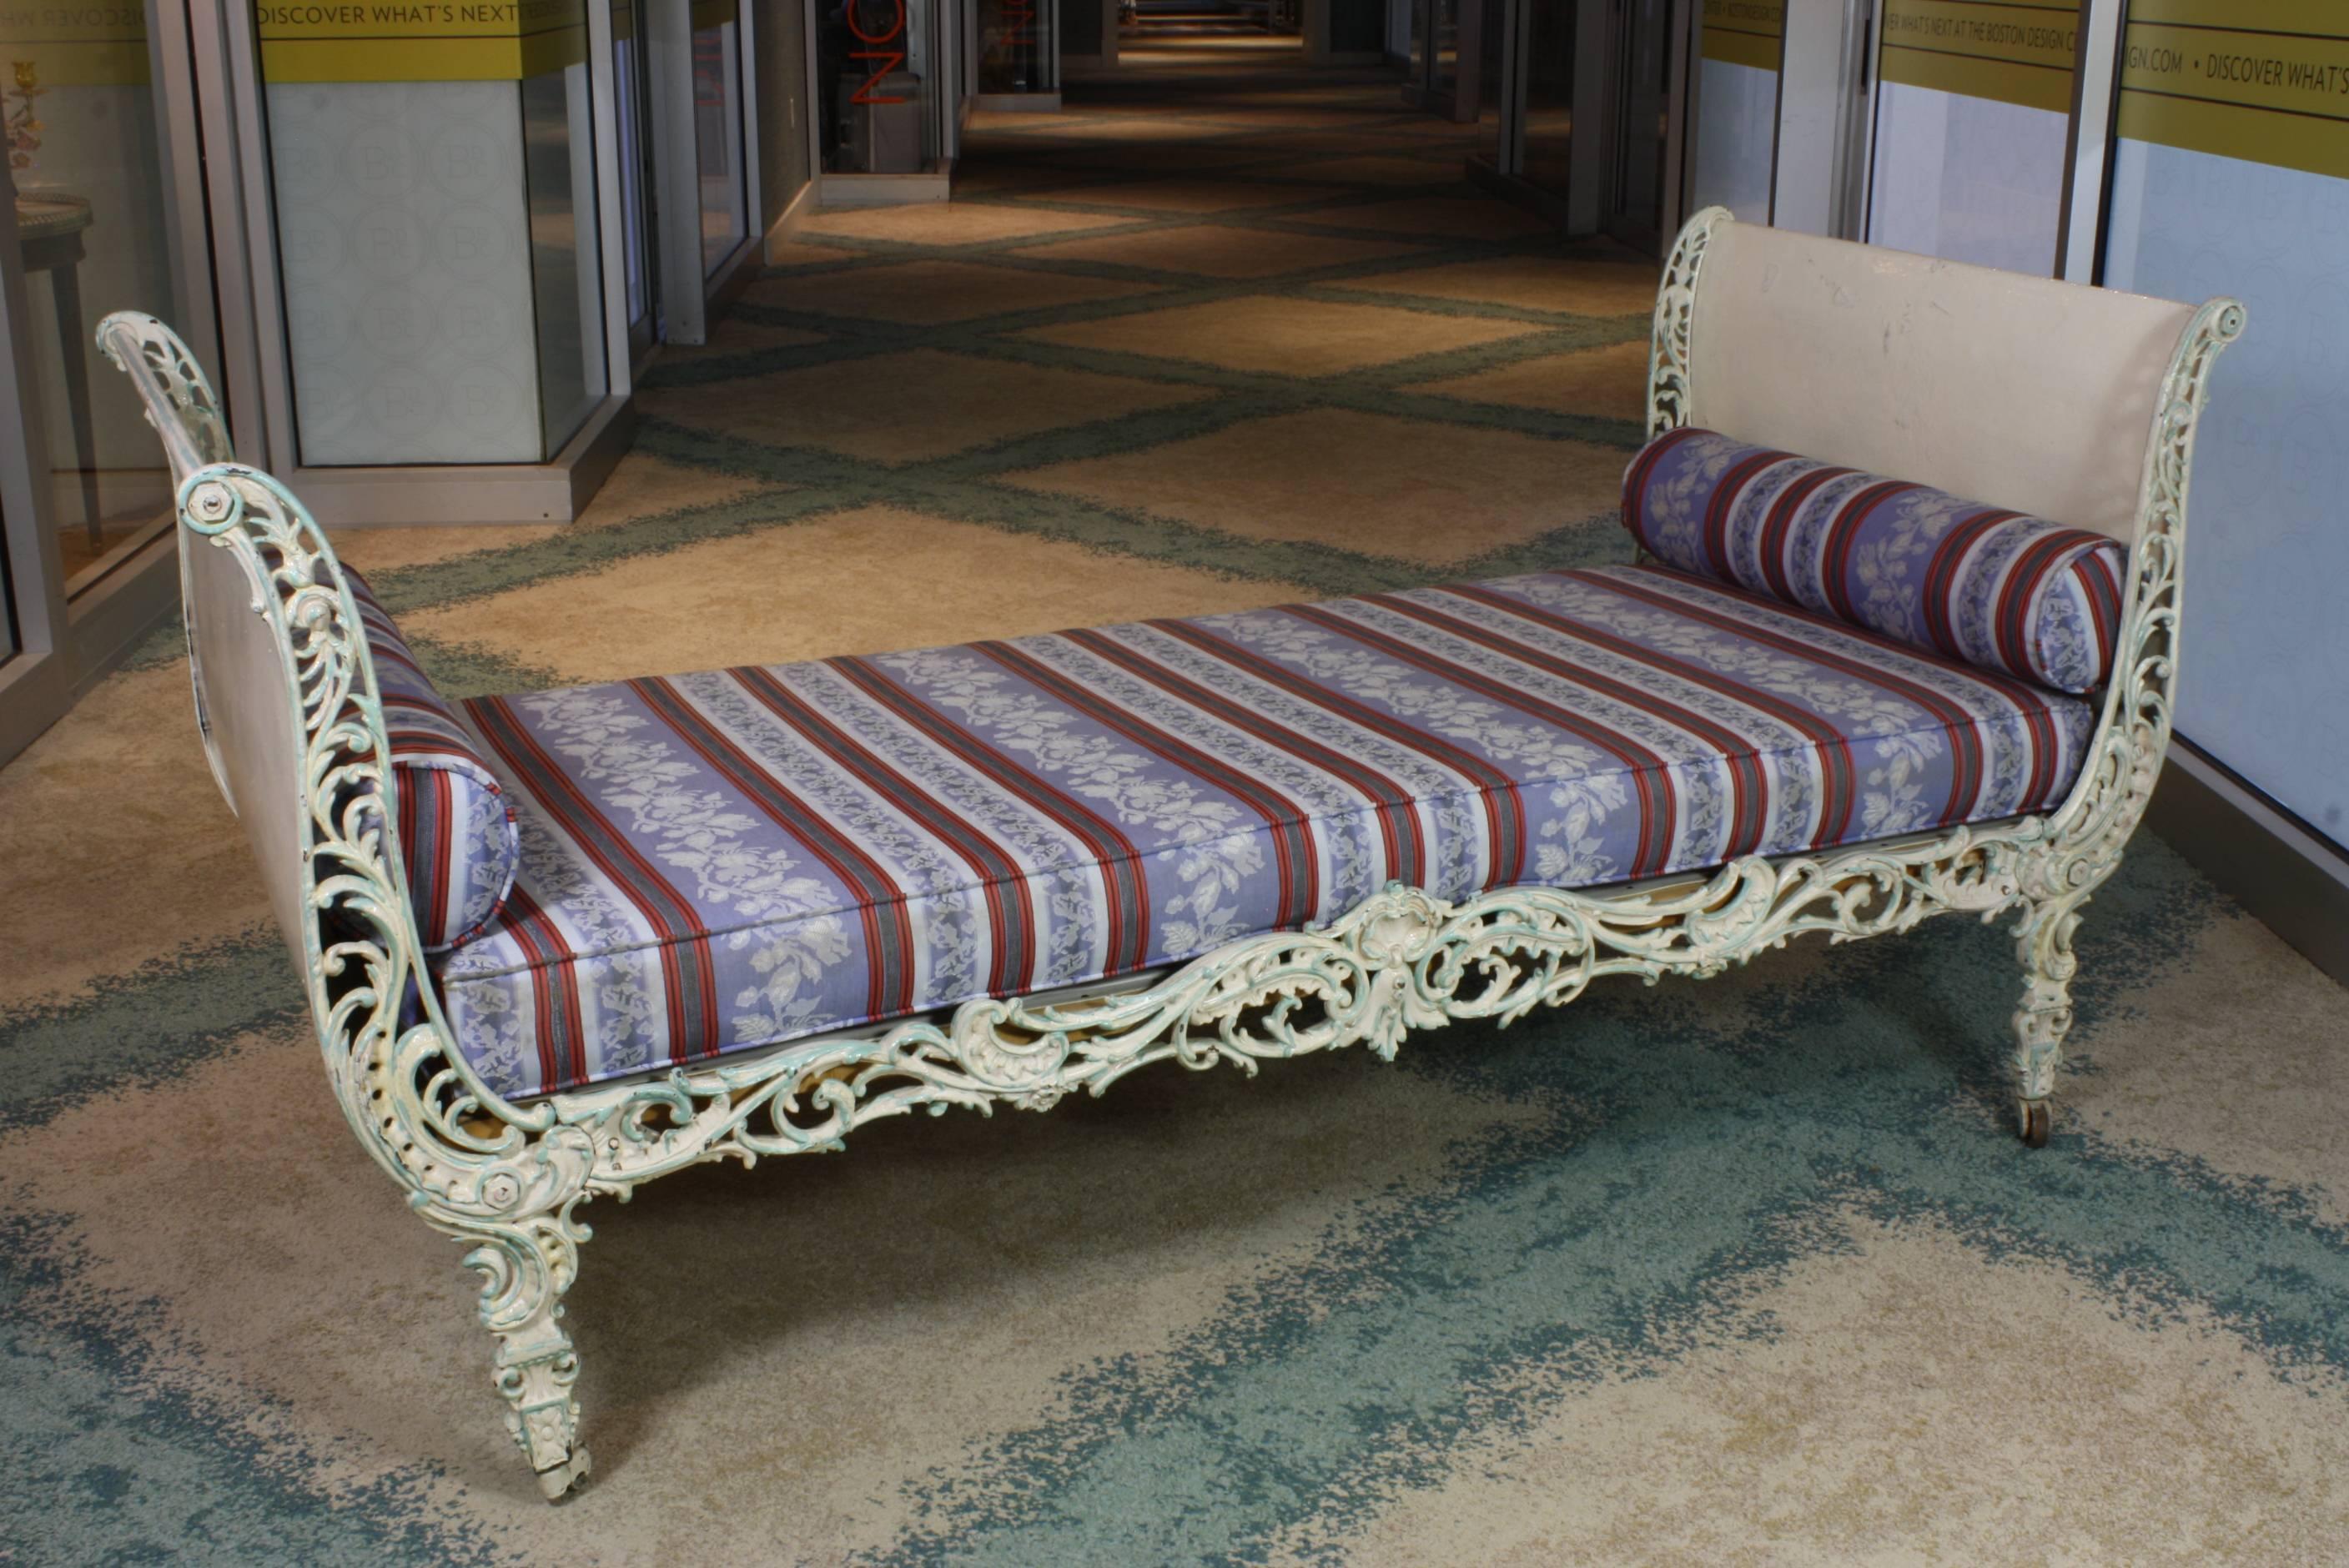 Very decorative French Louis XV or Rococo style painted cast-iron daybed with original casters (late 19th century). The daybed includes a seat cushion and two bolster pillows (the seat cushion has a width about 3 ½